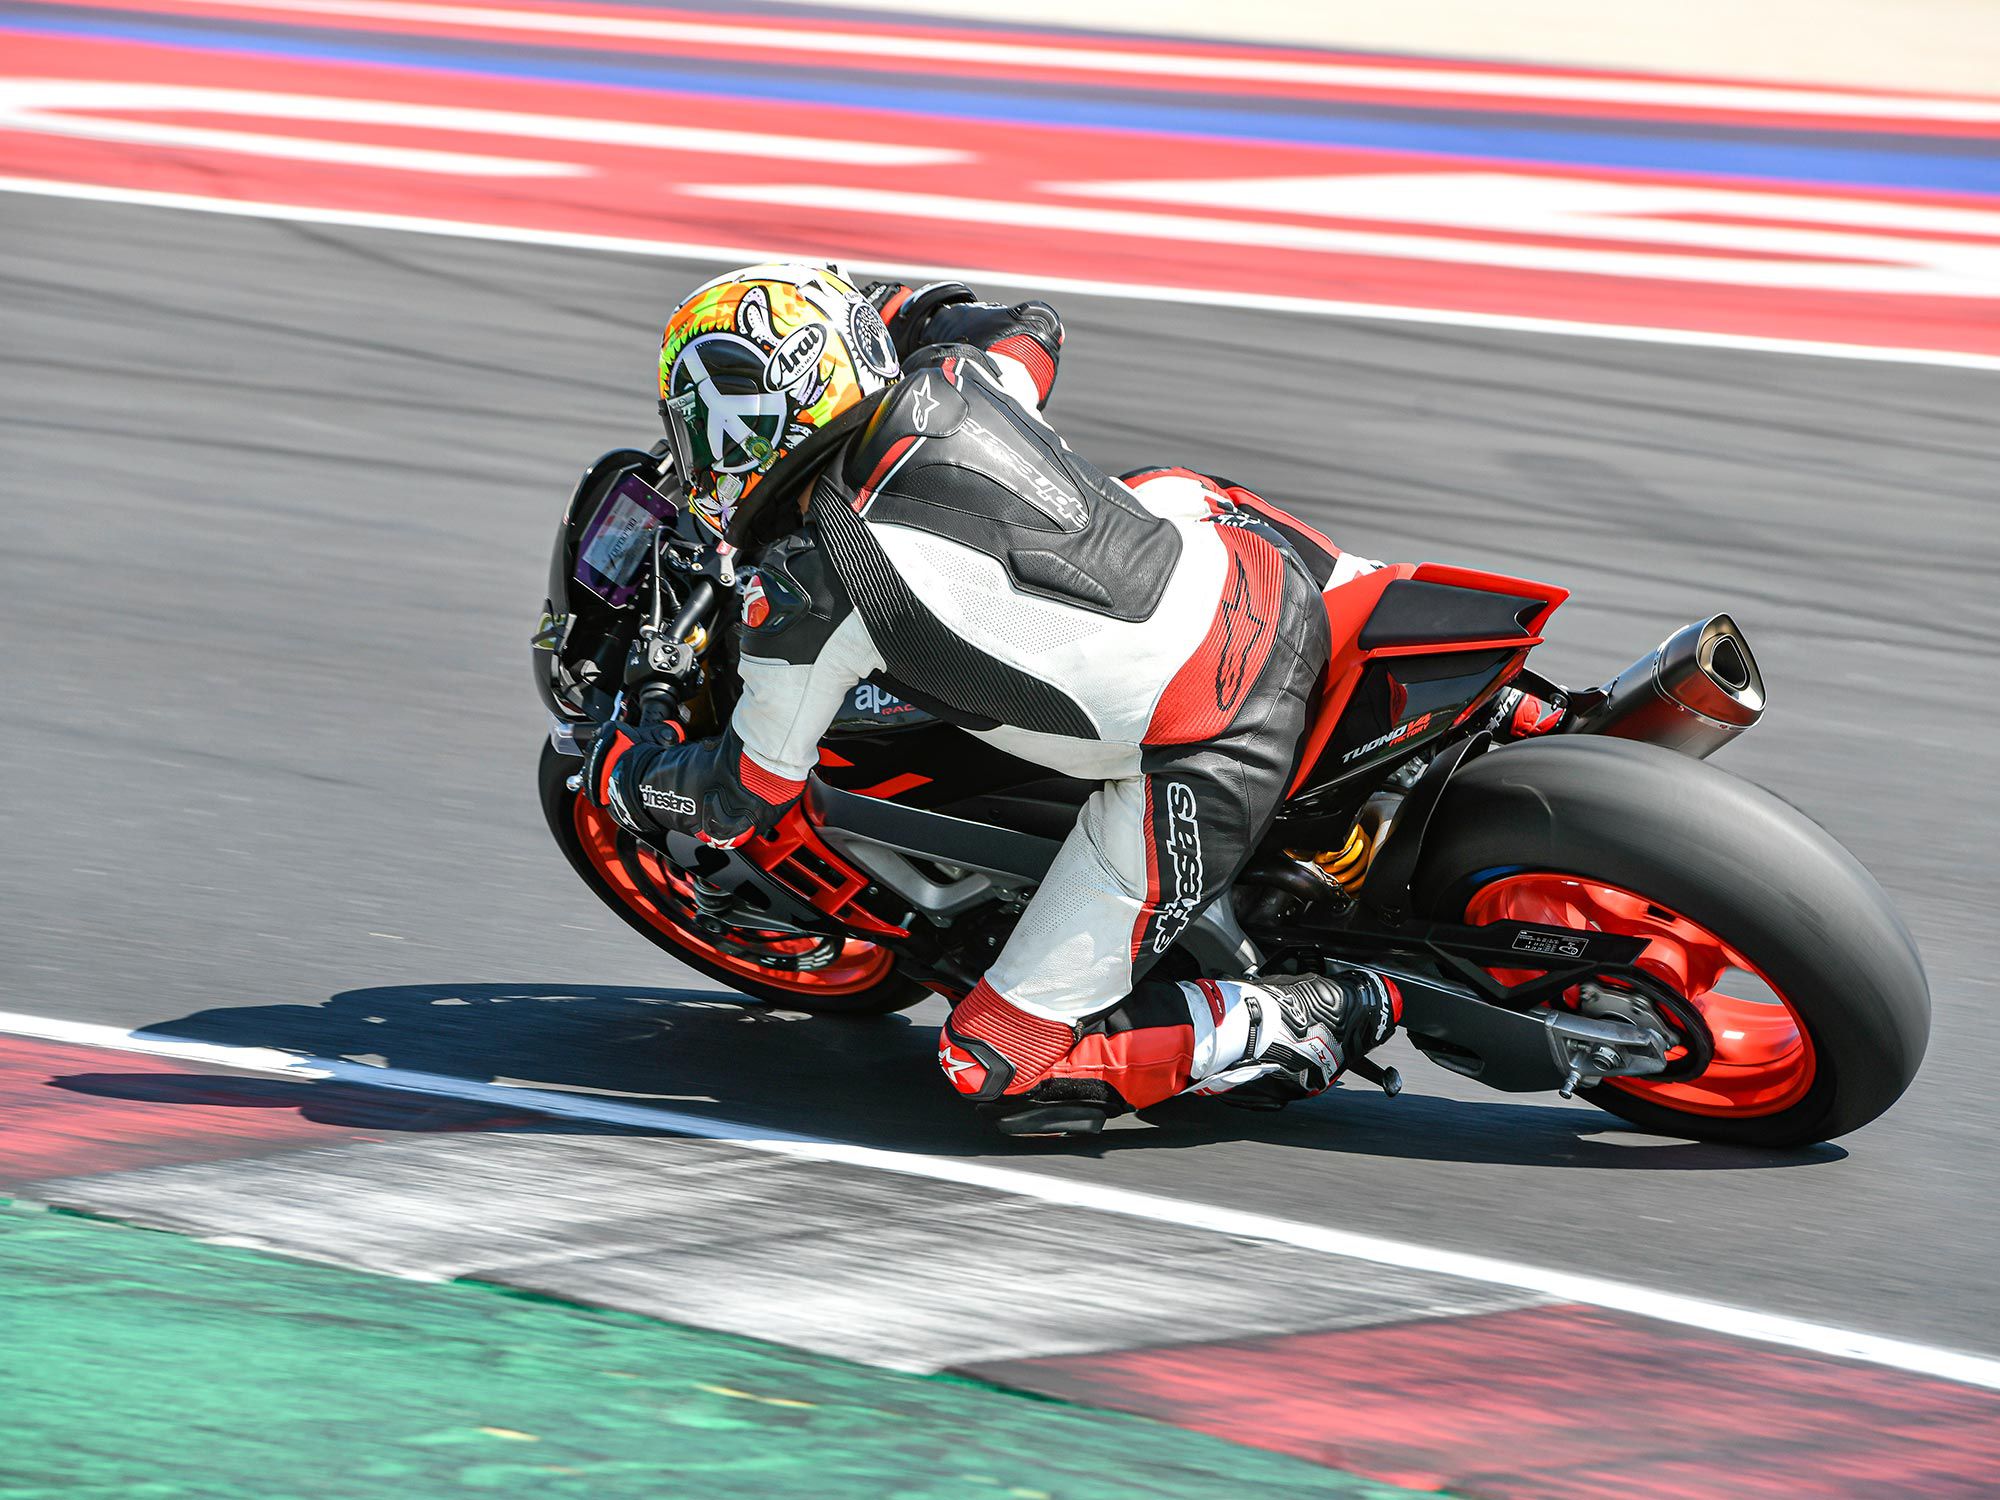 Aprilia fitted Pirelli SC1 slicks (Pirelli Diablo Supercorsas are the standard fitment) and chose the perfect setting in the form of the very grippy Misano racetrack.